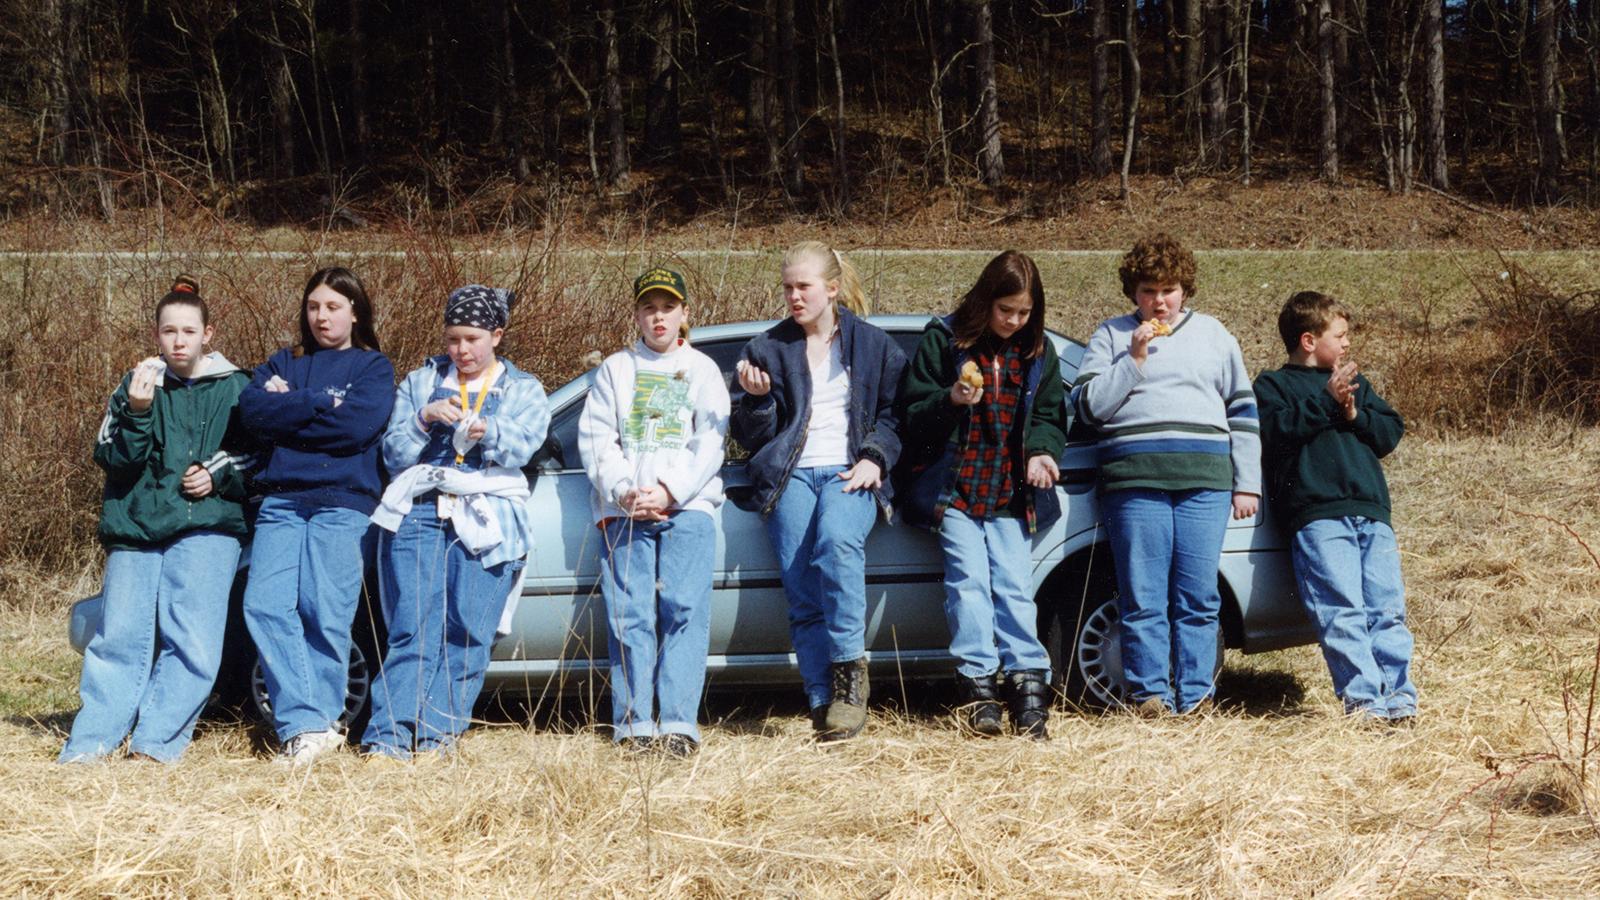 Volunteer tree-planters taking a break, North of Carbon Hill in Hocking County